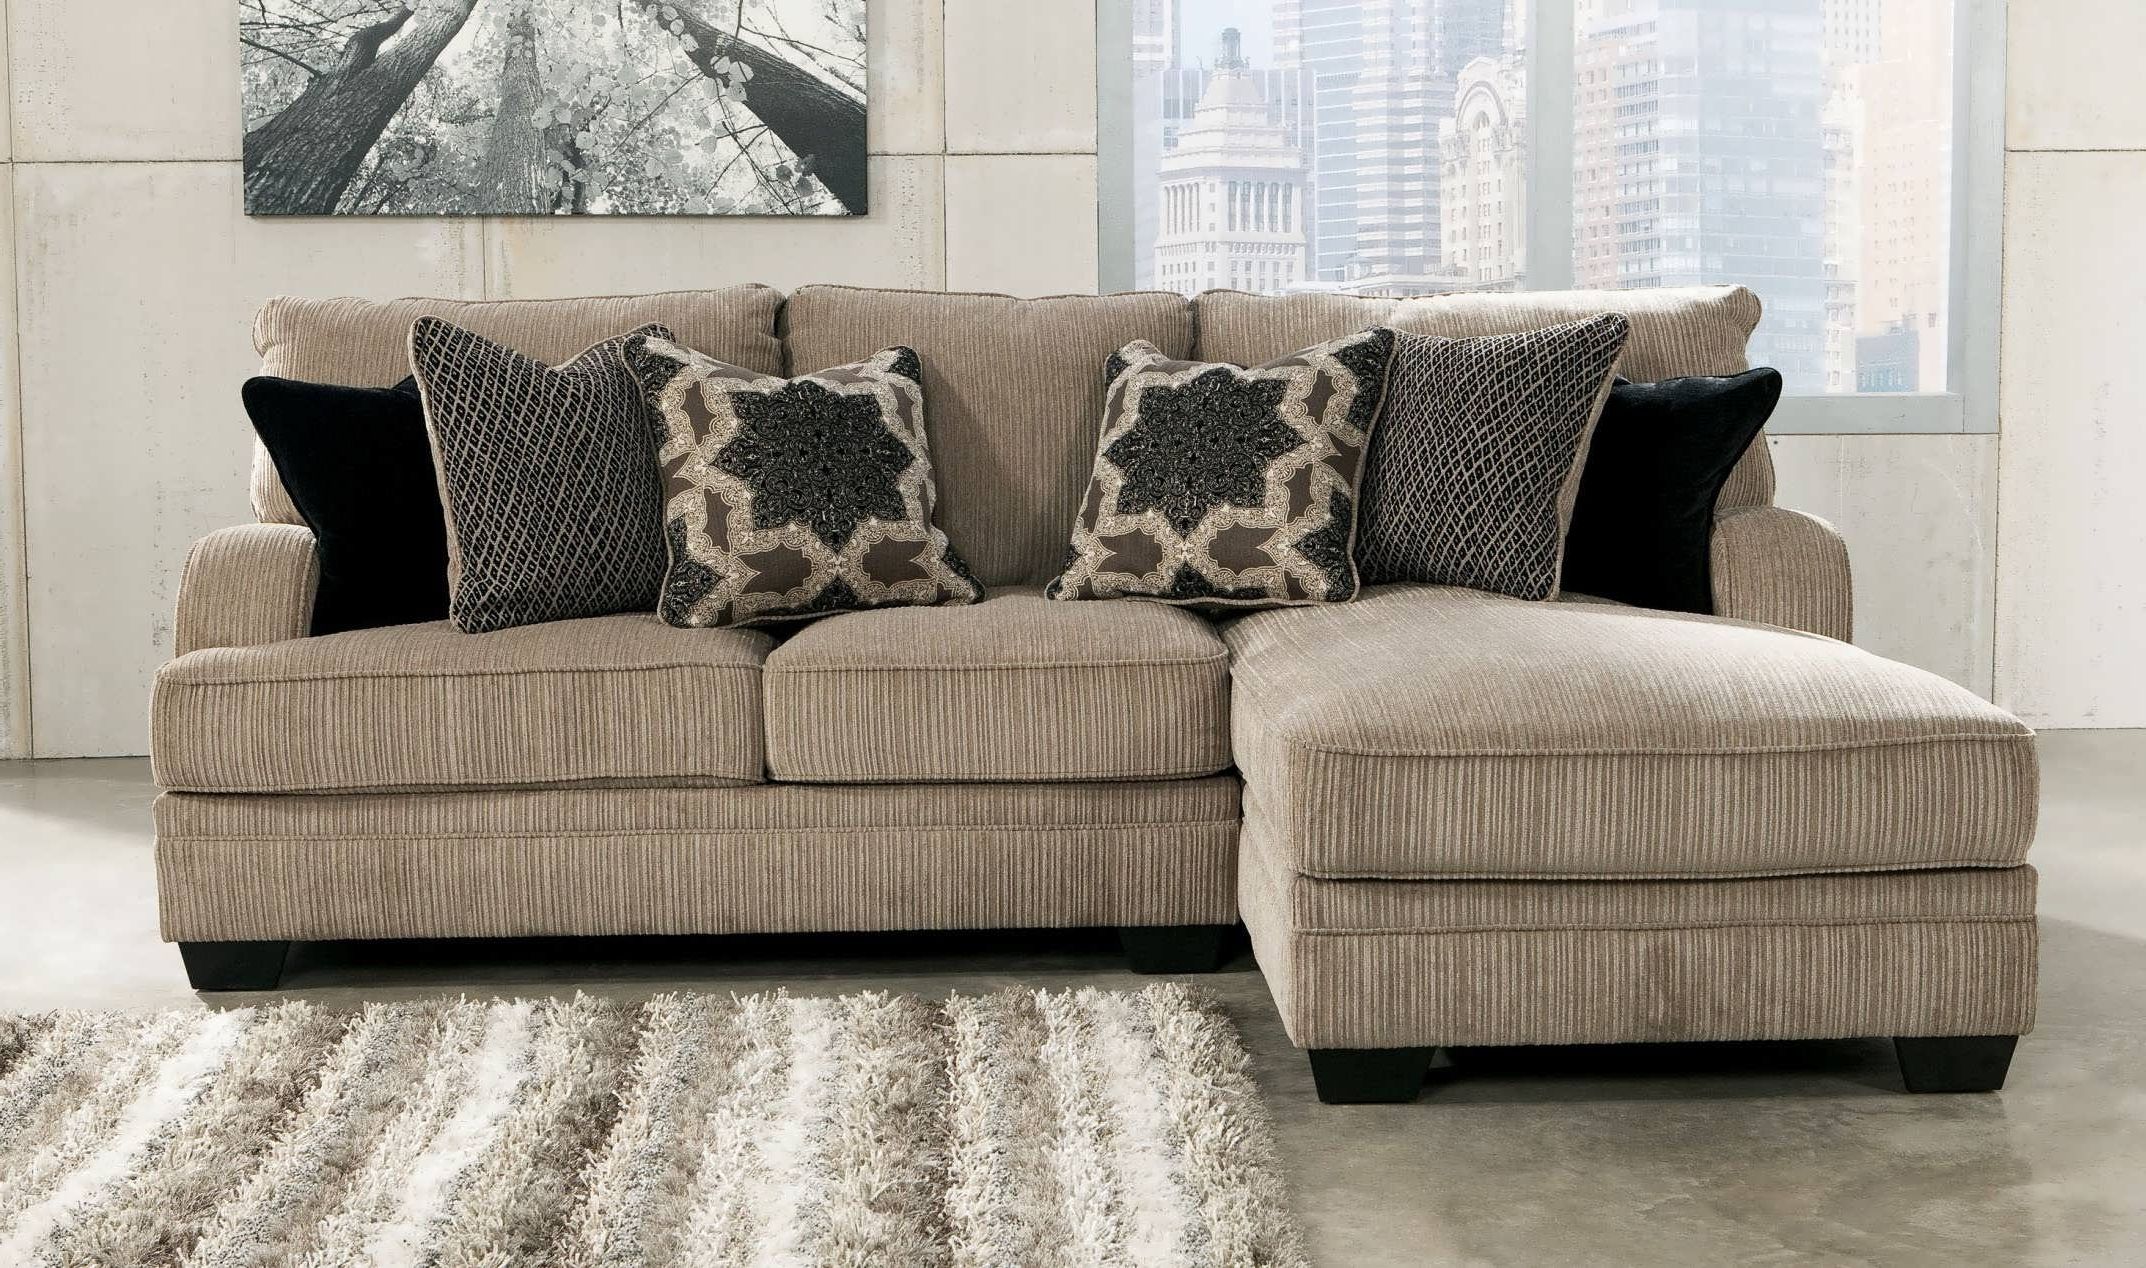 Favorite Sofa : Modern Sectional Sofas Sectionals For Small Spaces Cheap Inside Small Chaise Sectionals (View 1 of 15)